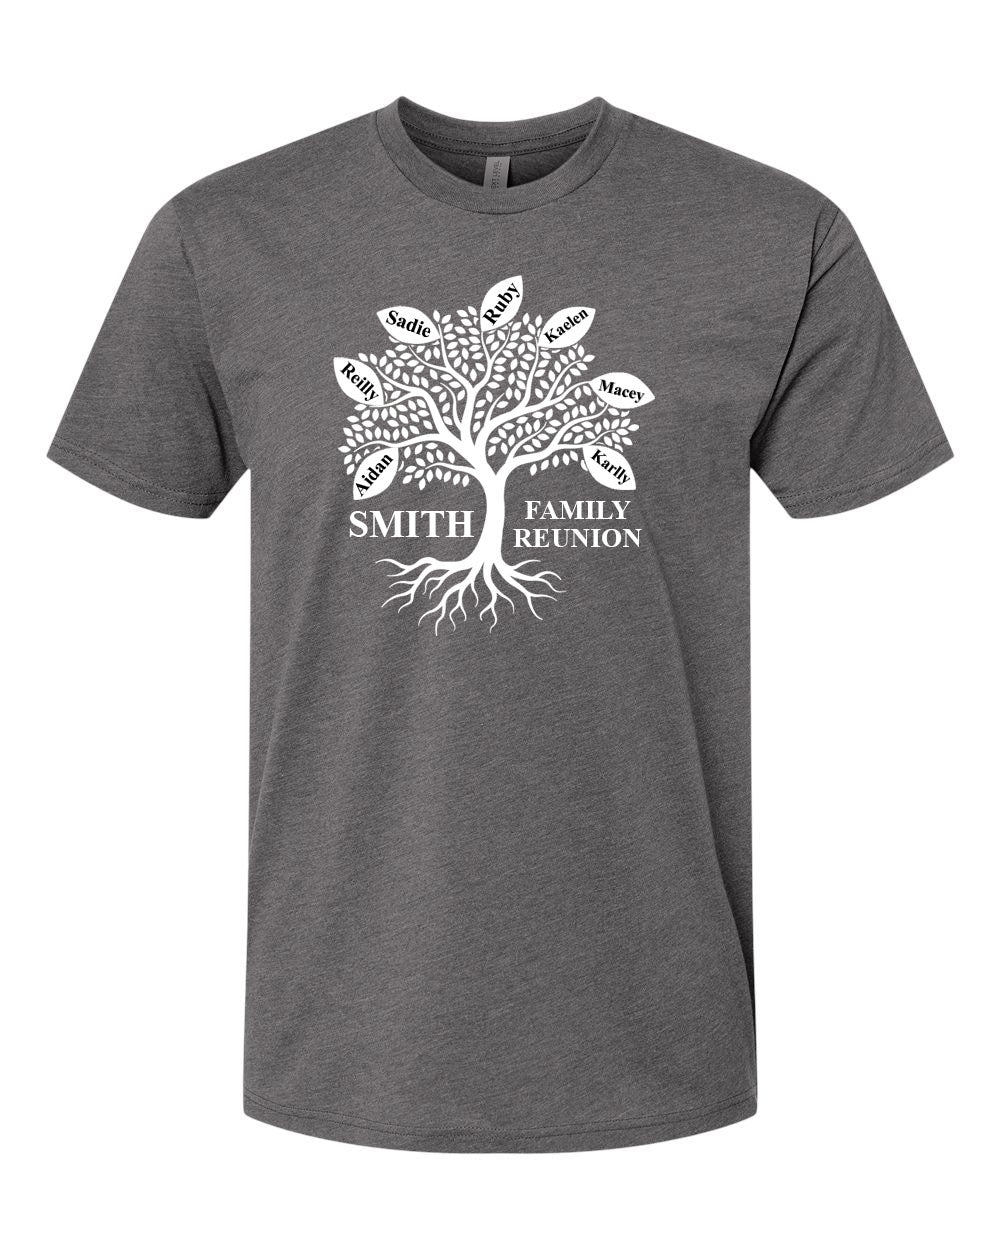 family tree designs for t shirts